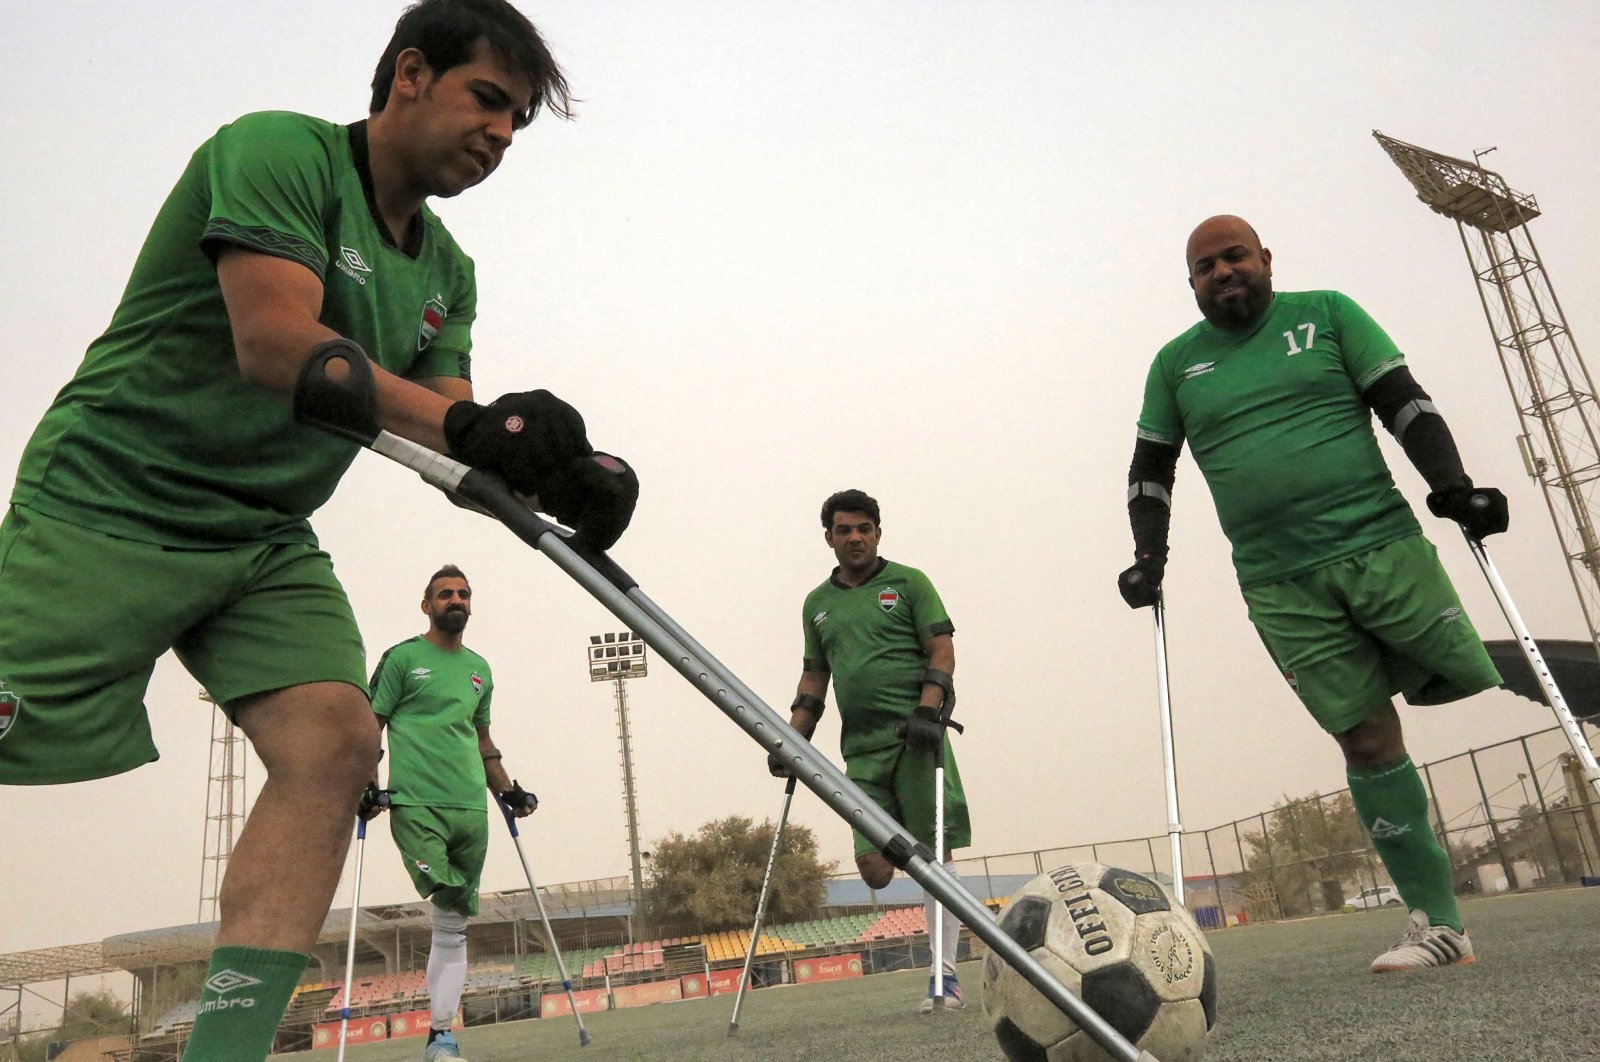 Members of the Iraqi national football team for amputees take part in a training session, Baghdad, Iraq, May 10, 2022. (AFP Photo)